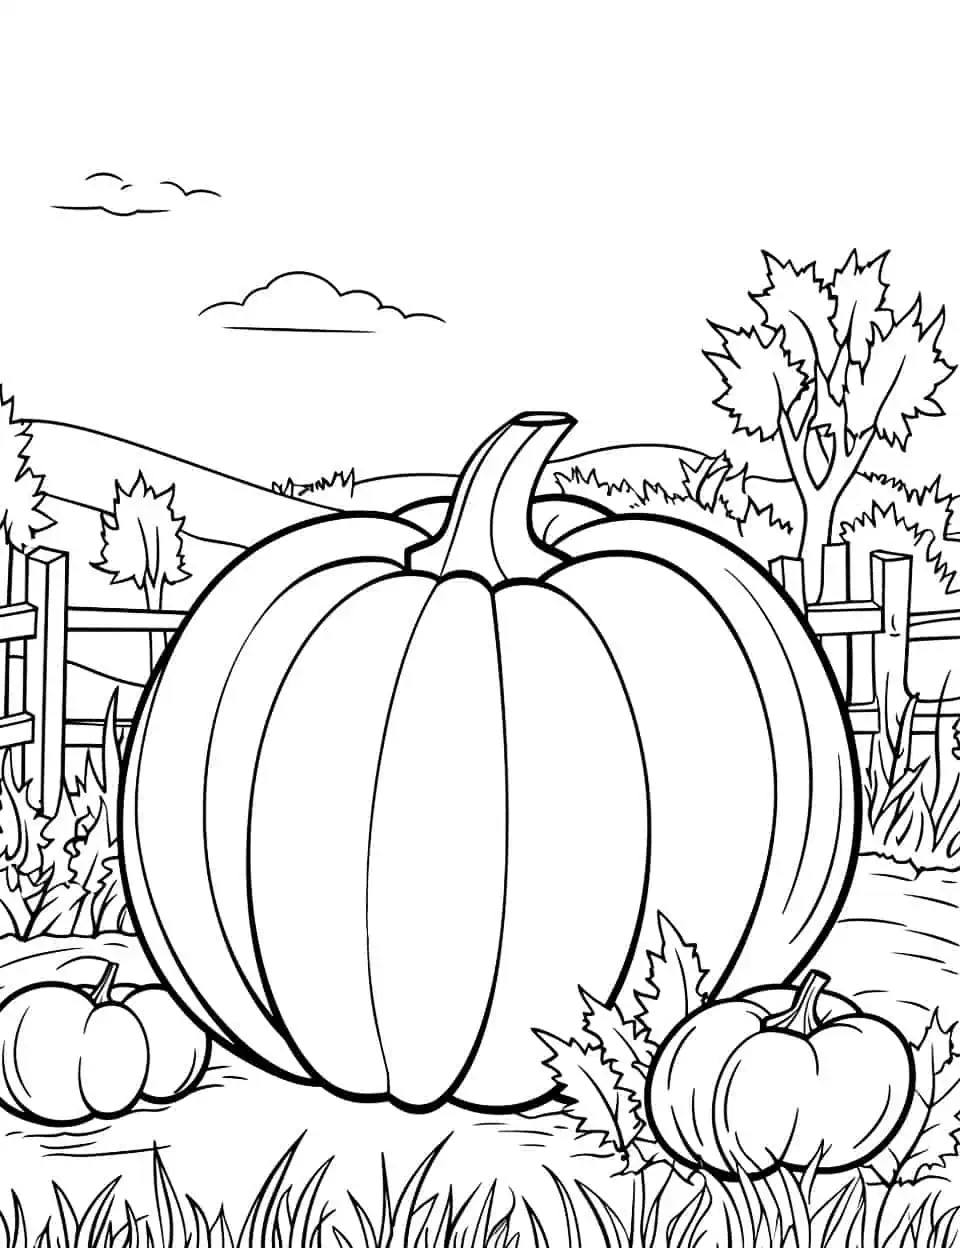 Fall Pumpkin Patch Coloring Page - A rustic pumpkin patch scene complete with hay bales and fall leaves.